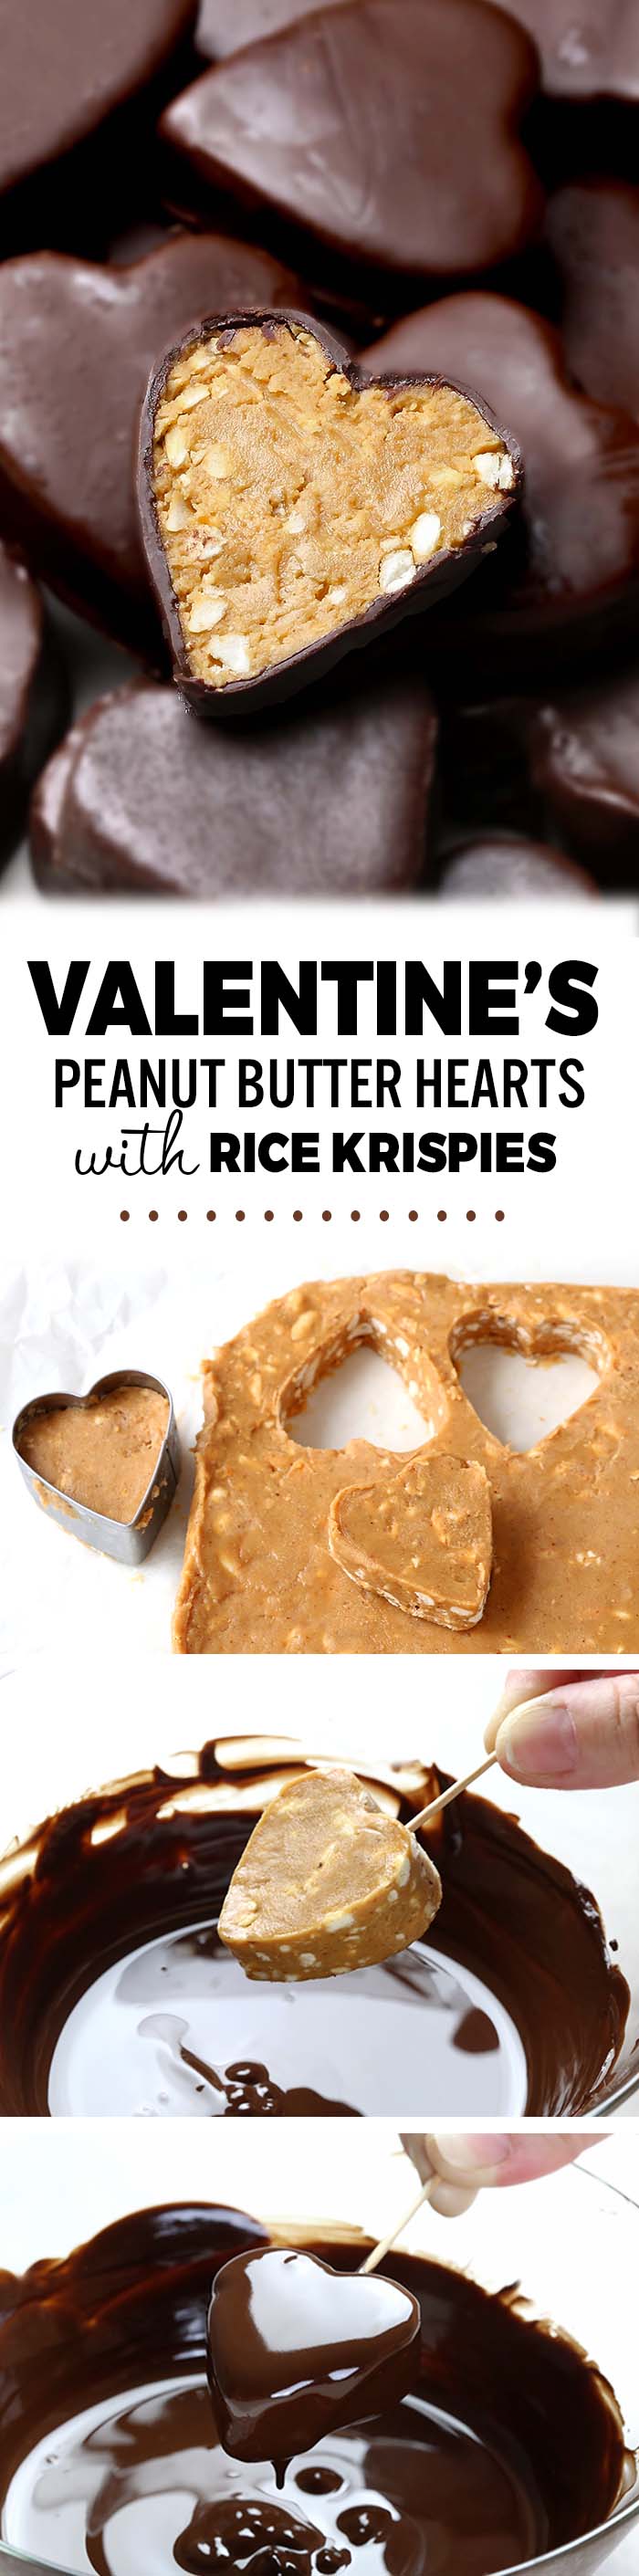 Peanut Butter Balls with Rice Krispies now in a new, special Valentine's Day edition in the shape of heart, creamy and crunchy, with just 5 ingredients and only about 10 minutes to prepare....do I need to say more ? 